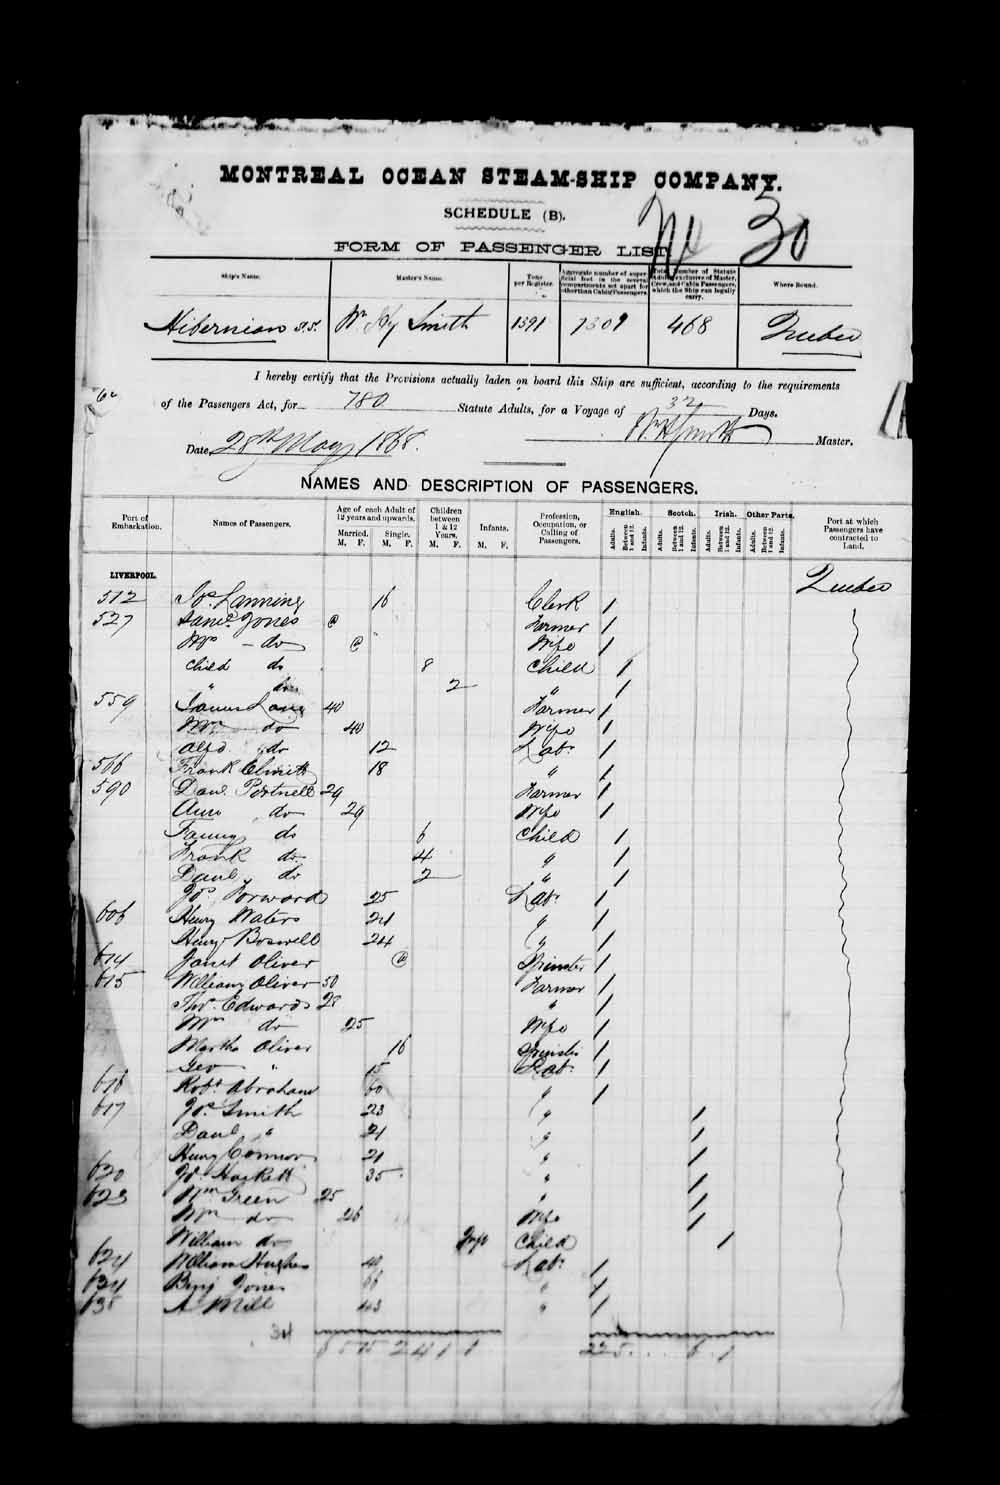 Digitized page of Passenger Lists for Image No.: e003530483